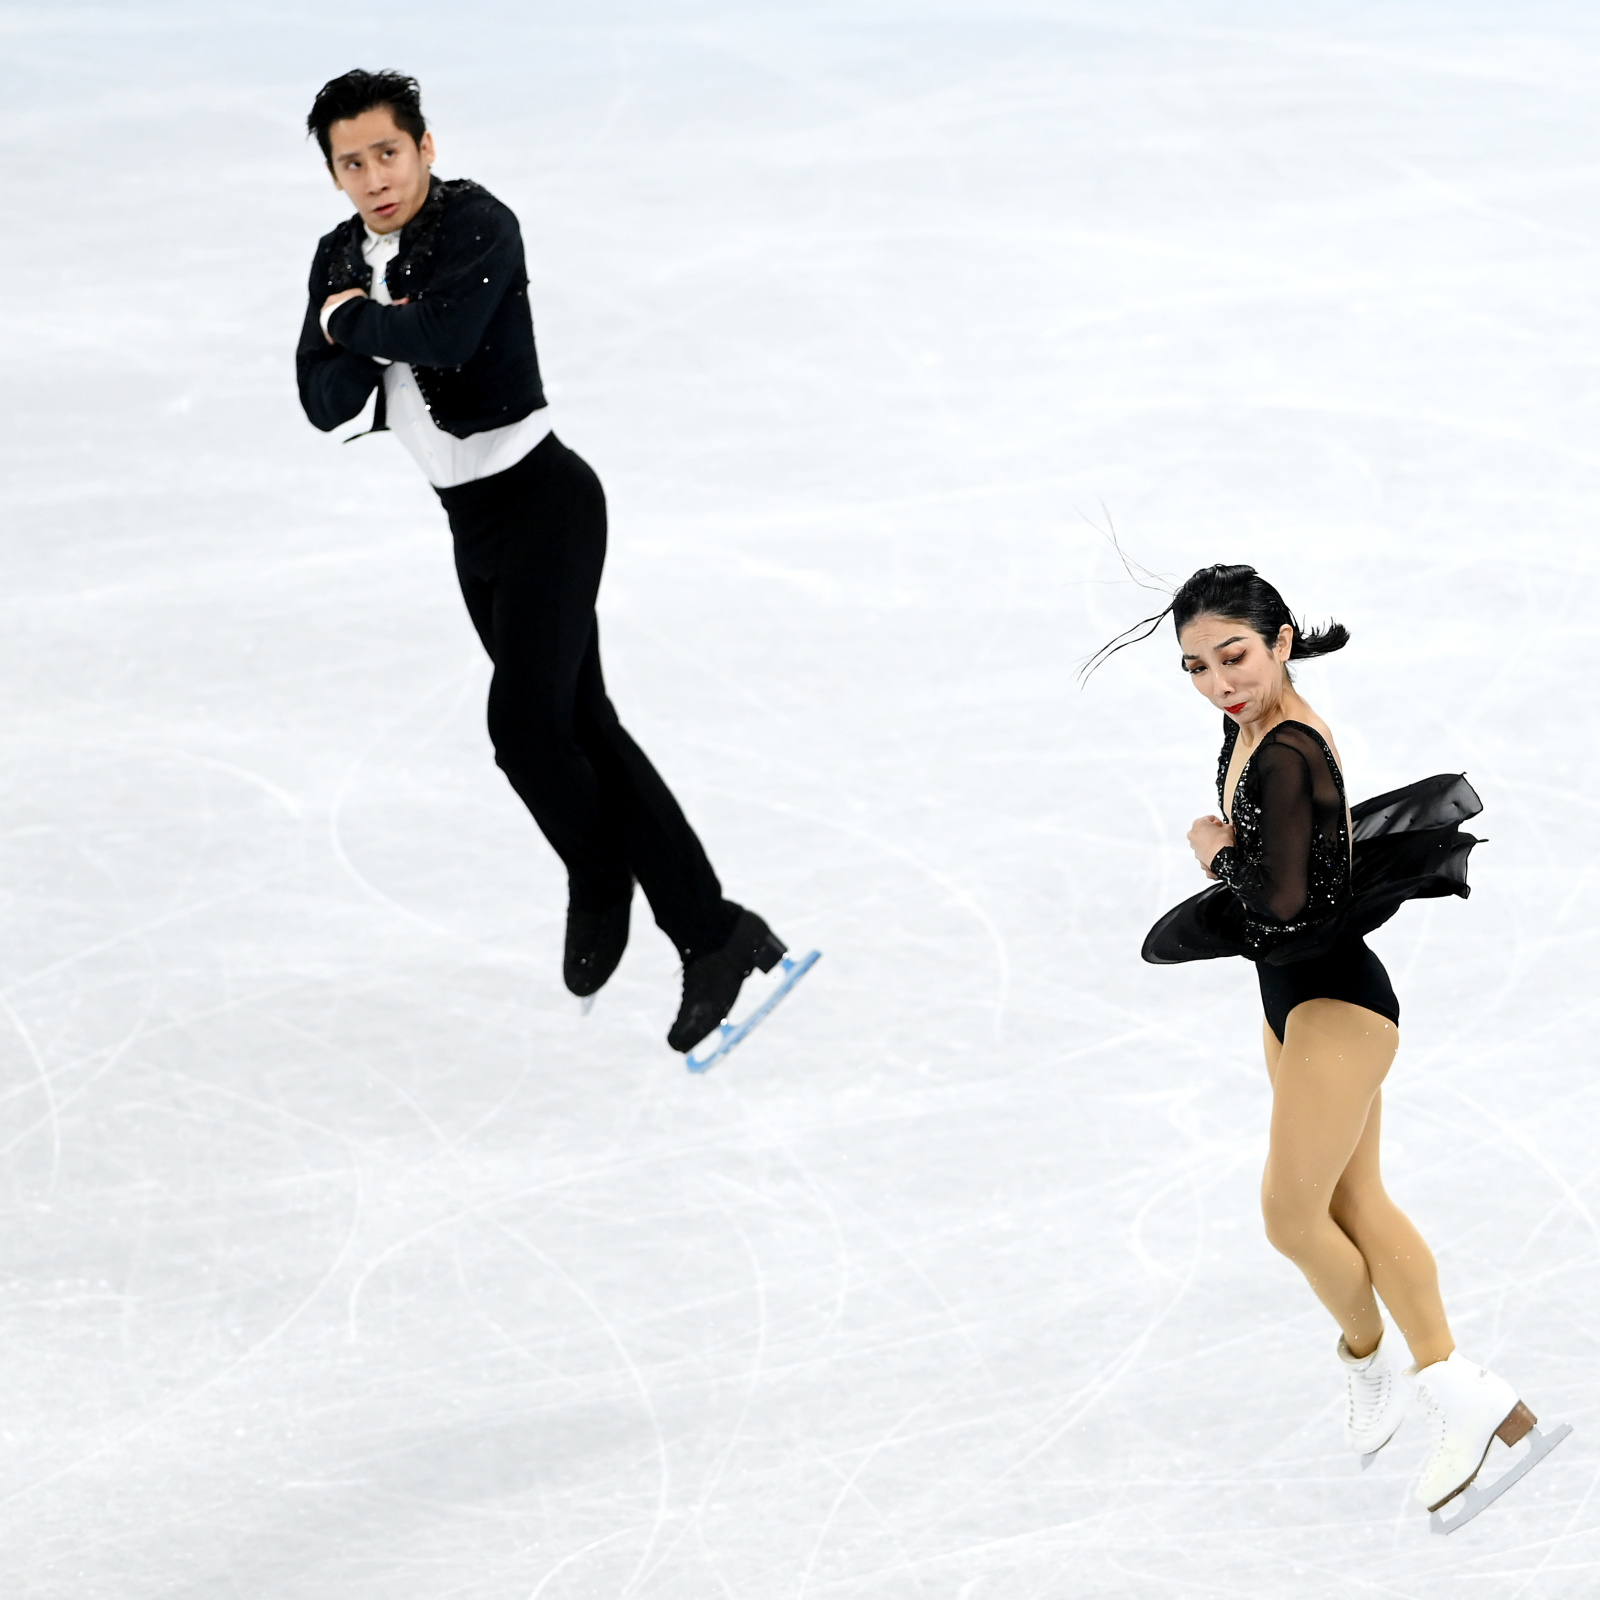 Pairs Figure Skating Results 2022 China Sets Record in Short Program; USA in Top 3 News, Scores, Highlights, Stats, and Rumors Bleacher Report